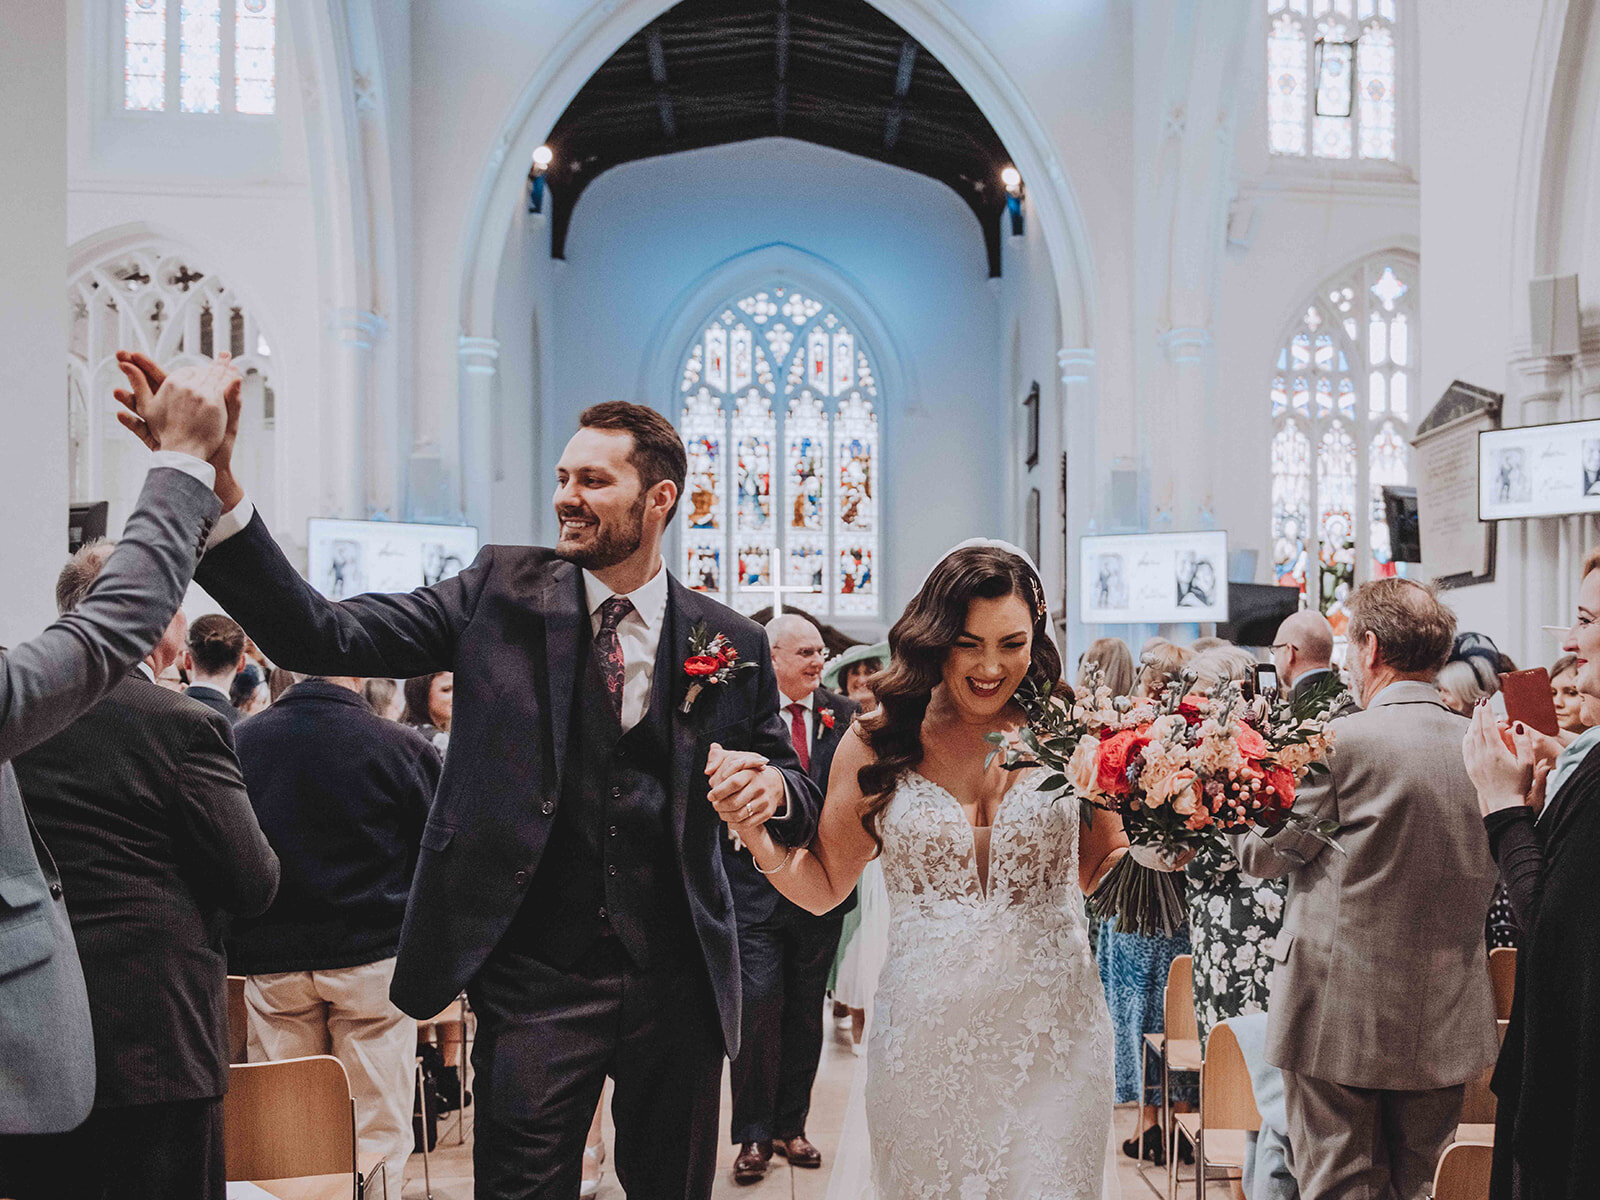 Groom exchanges a high five while bride smiles holding bouquet as they walk out of HT Cambridge having just become husband and wife